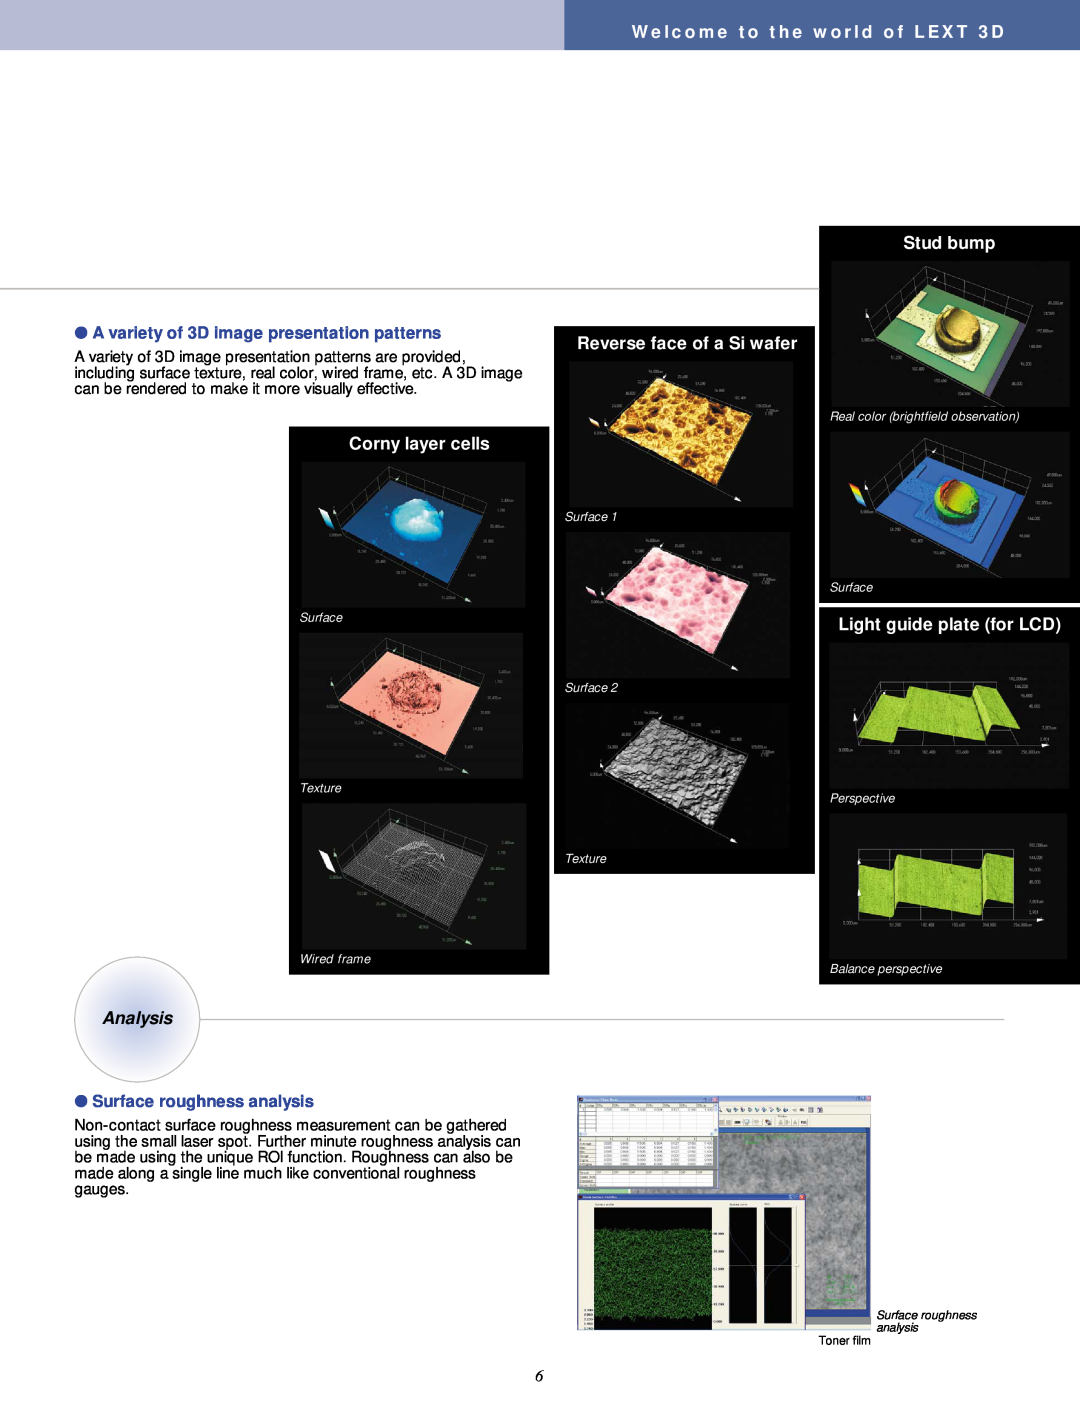 Olympus OLS3100 manual A variety of 3D image presentation patterns, Corny layer cells, Analysis, Reverse face of a Si wafer 